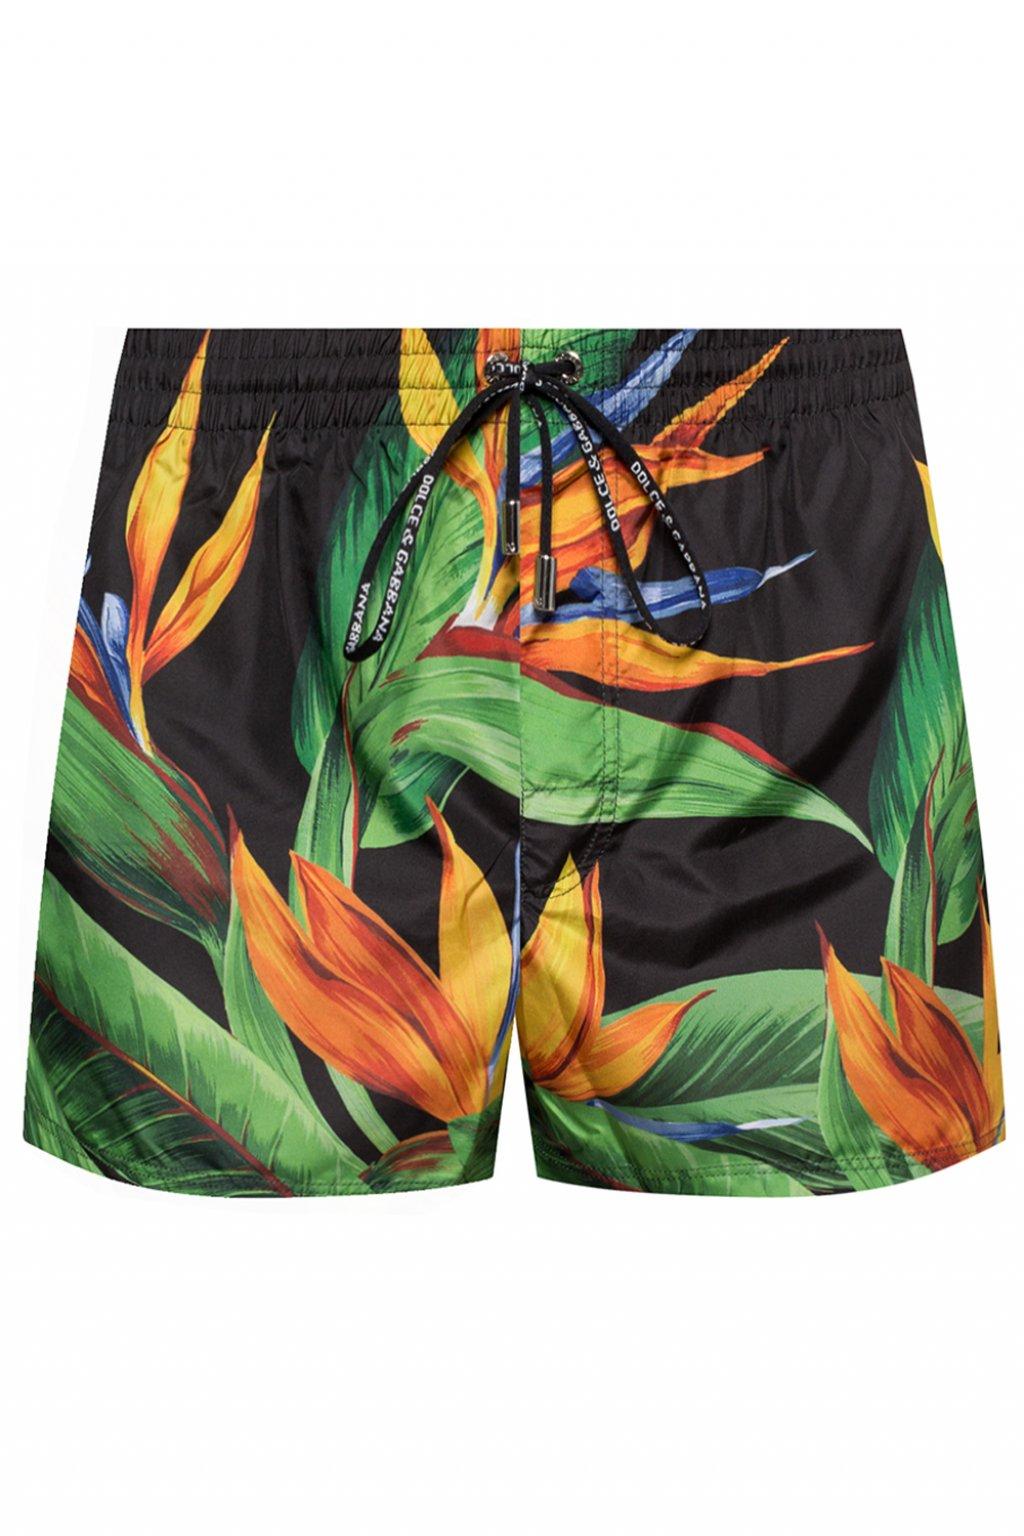 Dolce & Gabbana Synthetic Printed Swimming Trunks for Men - Lyst